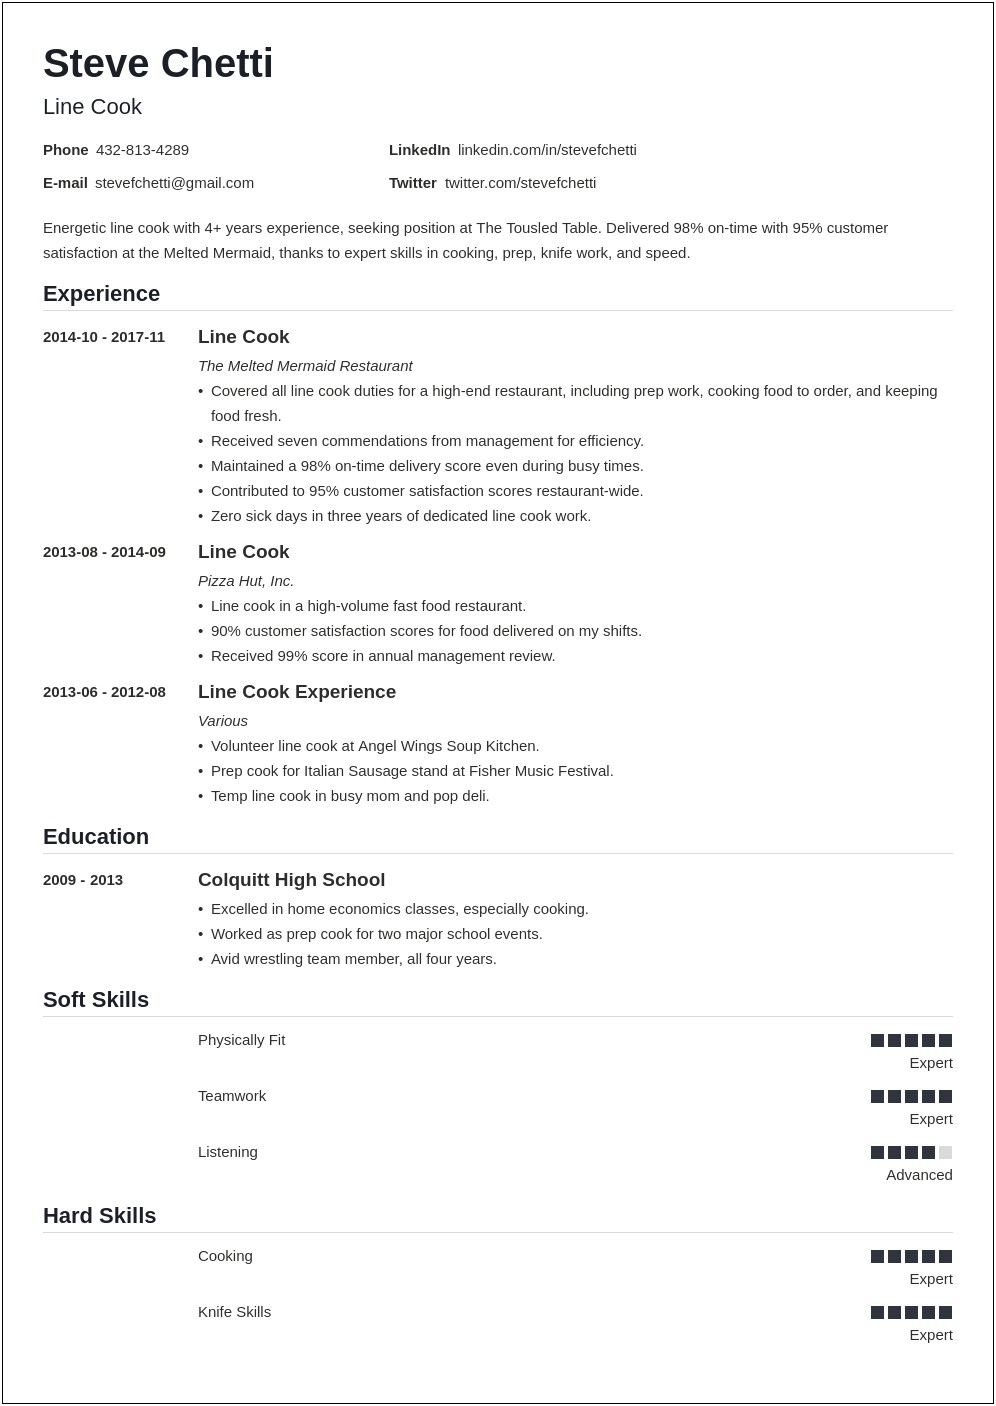 Resume Examples For Cook At Cook Out